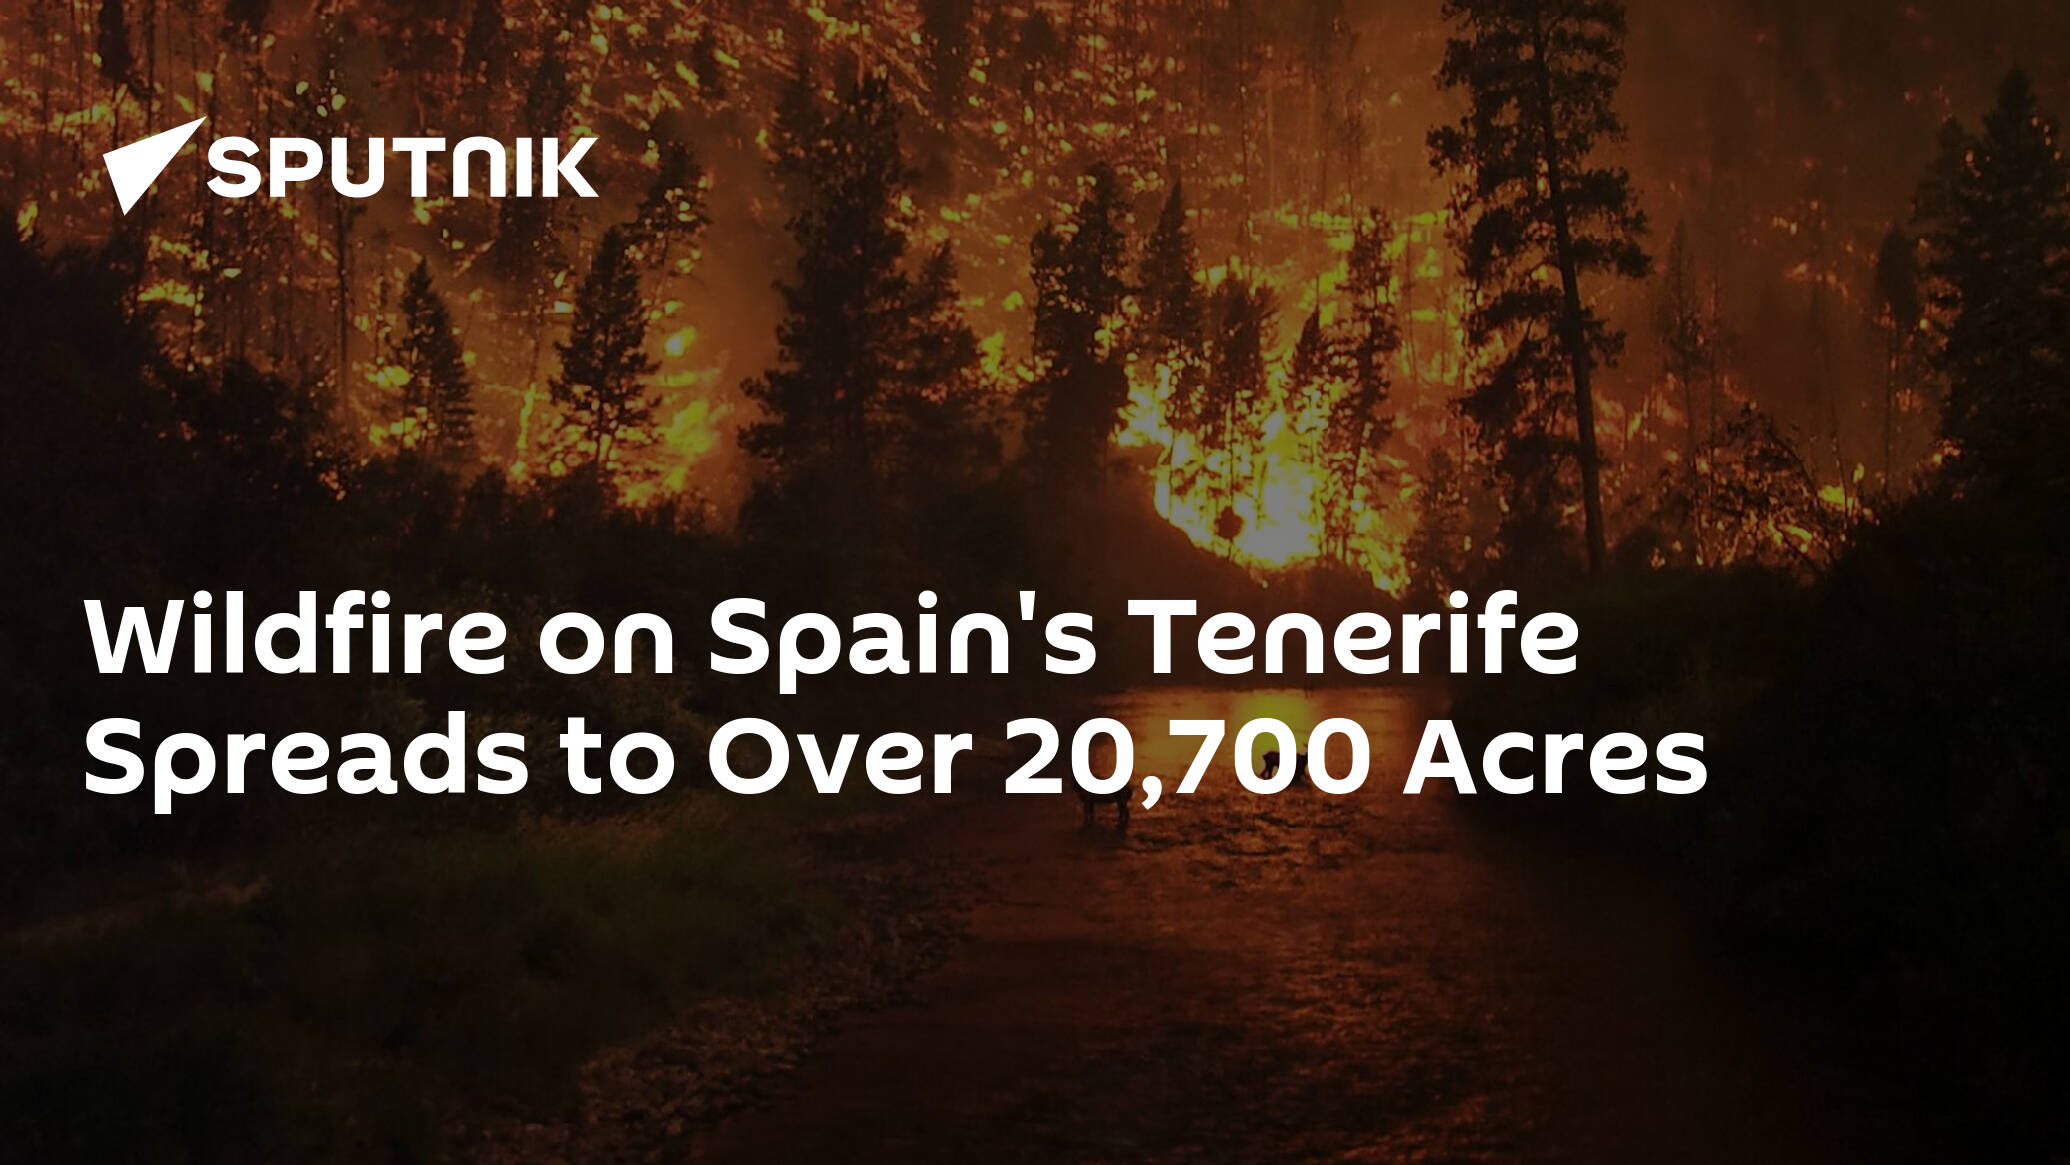 Wildfire on Spain's Tenerife Spreads to Over 20,700 Acres